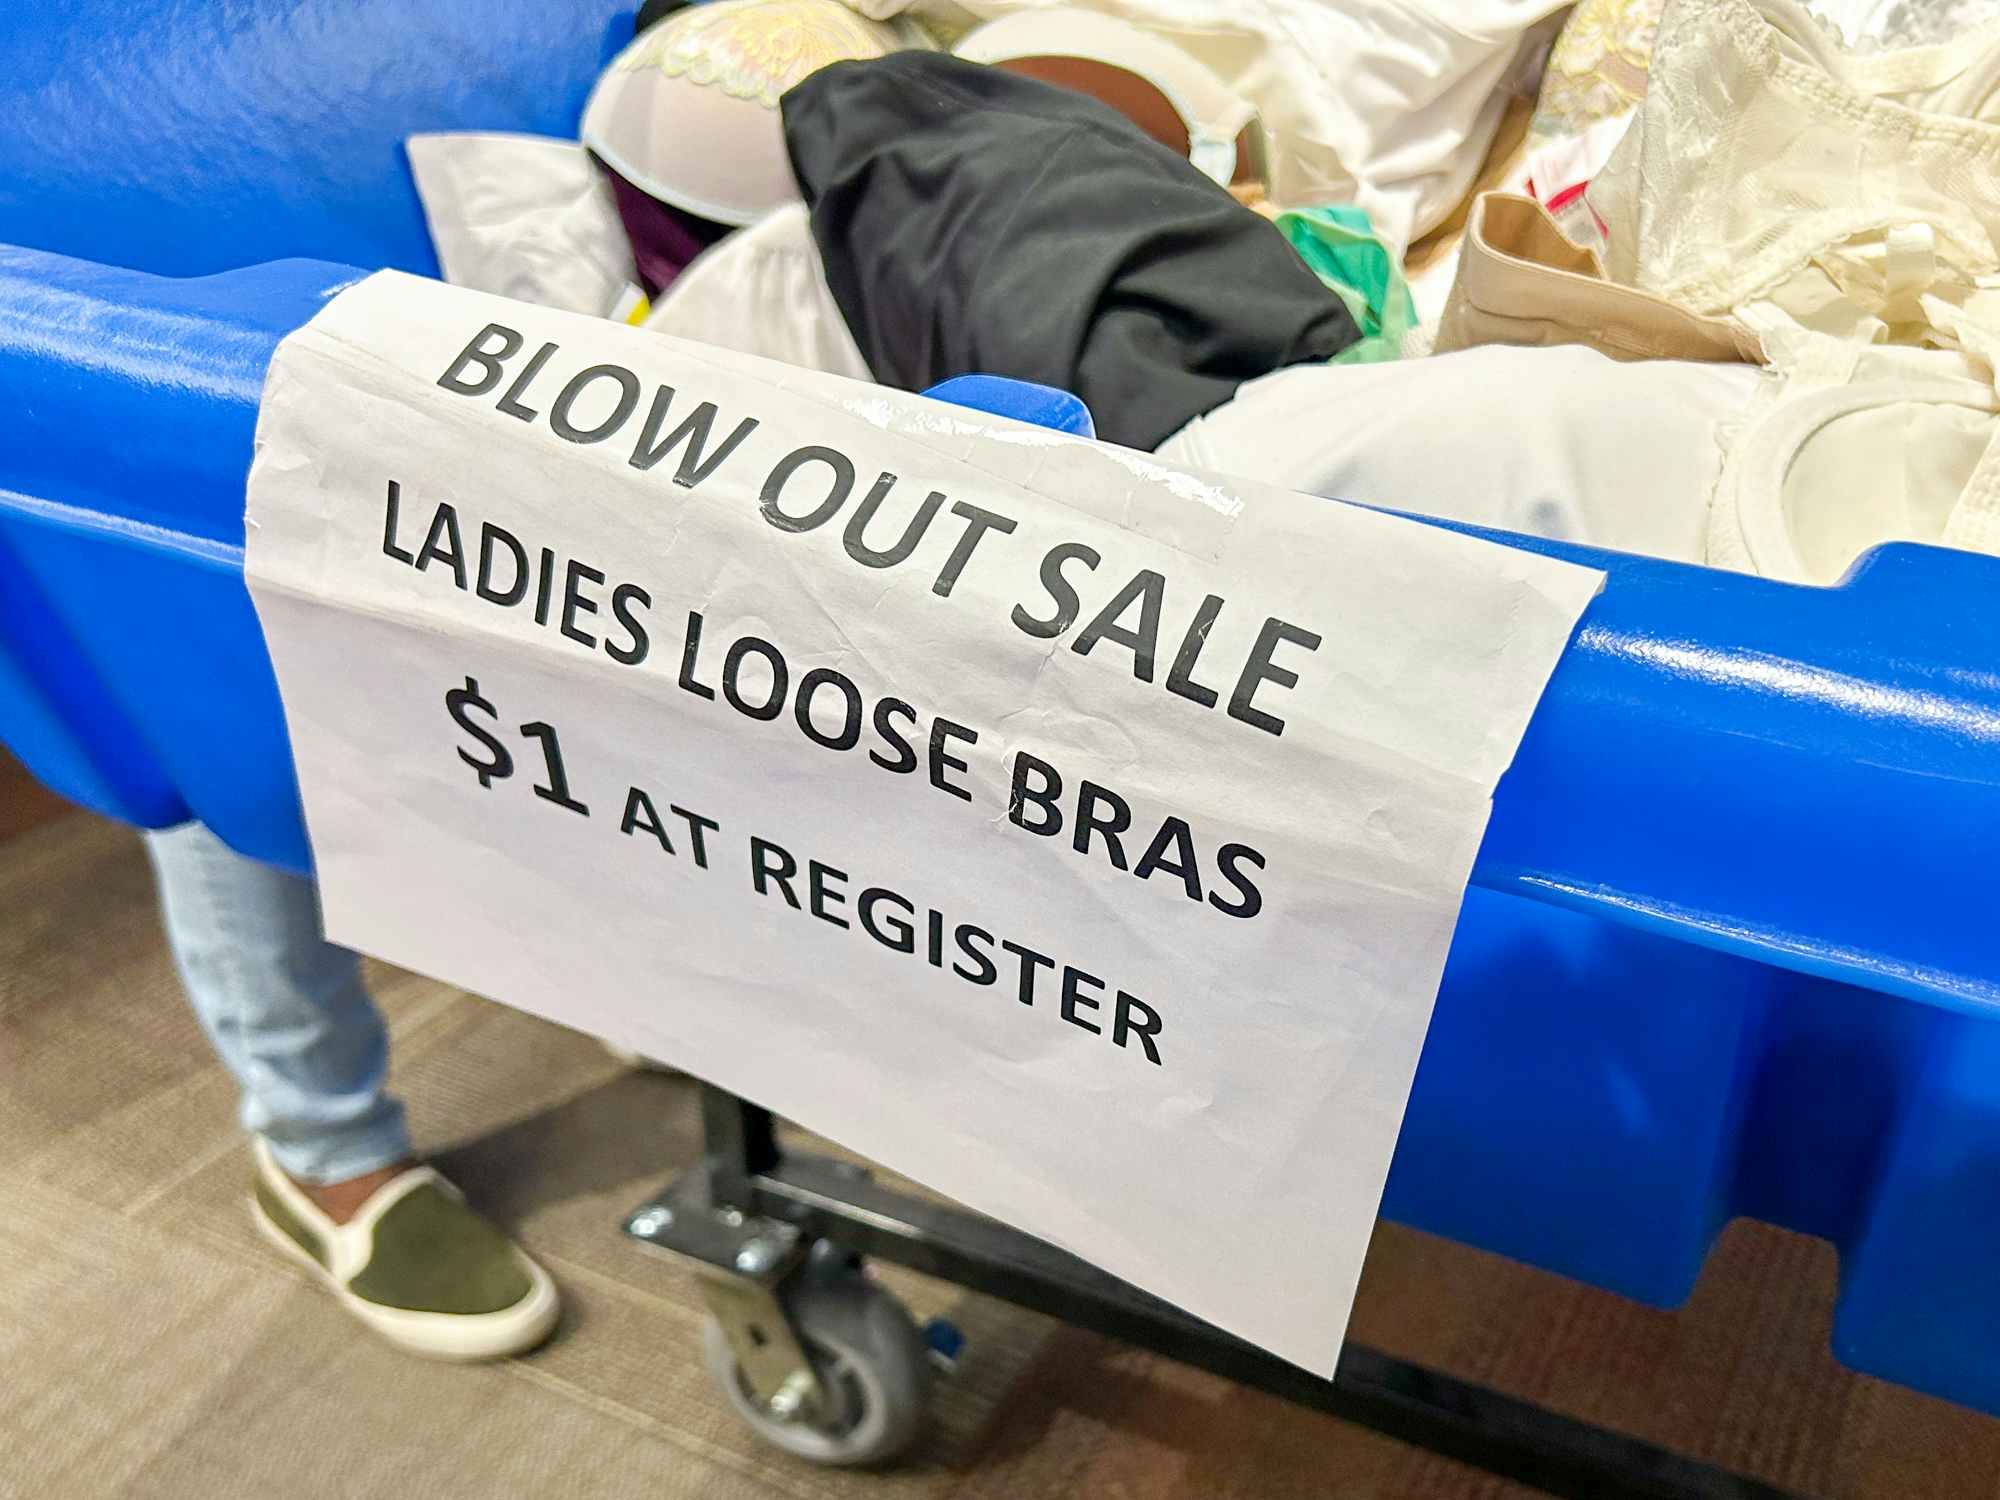 A bin with bras in it with a sign that says "Blow out sale. Loose bras $1 at register